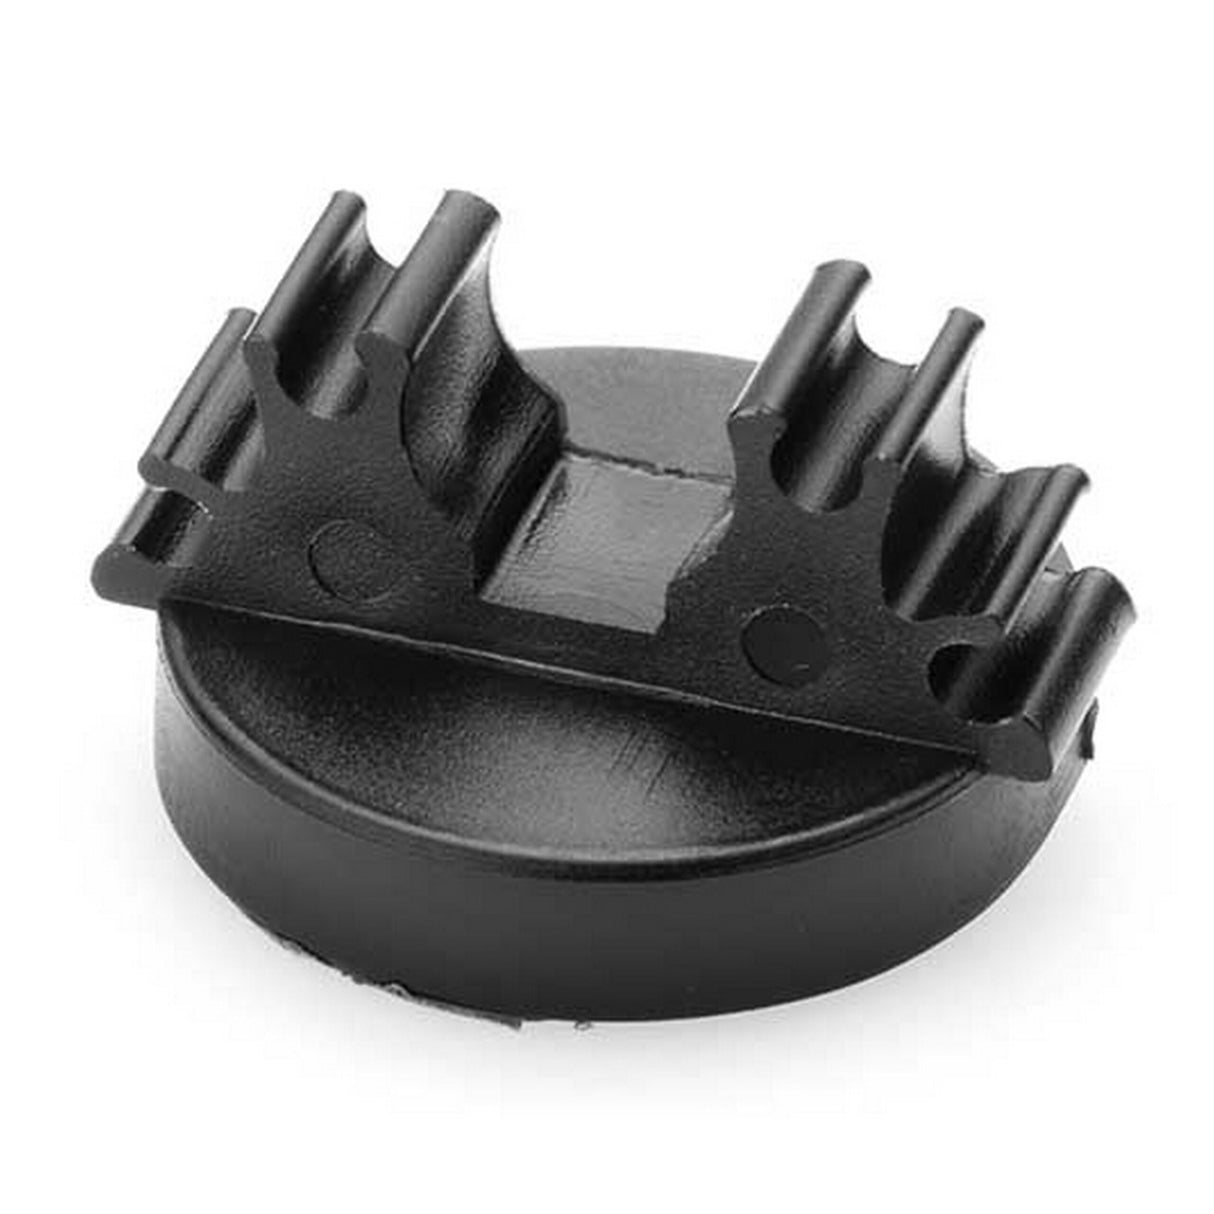 DPA DMM0011-B Magnet Mount for Lavalier Microphone